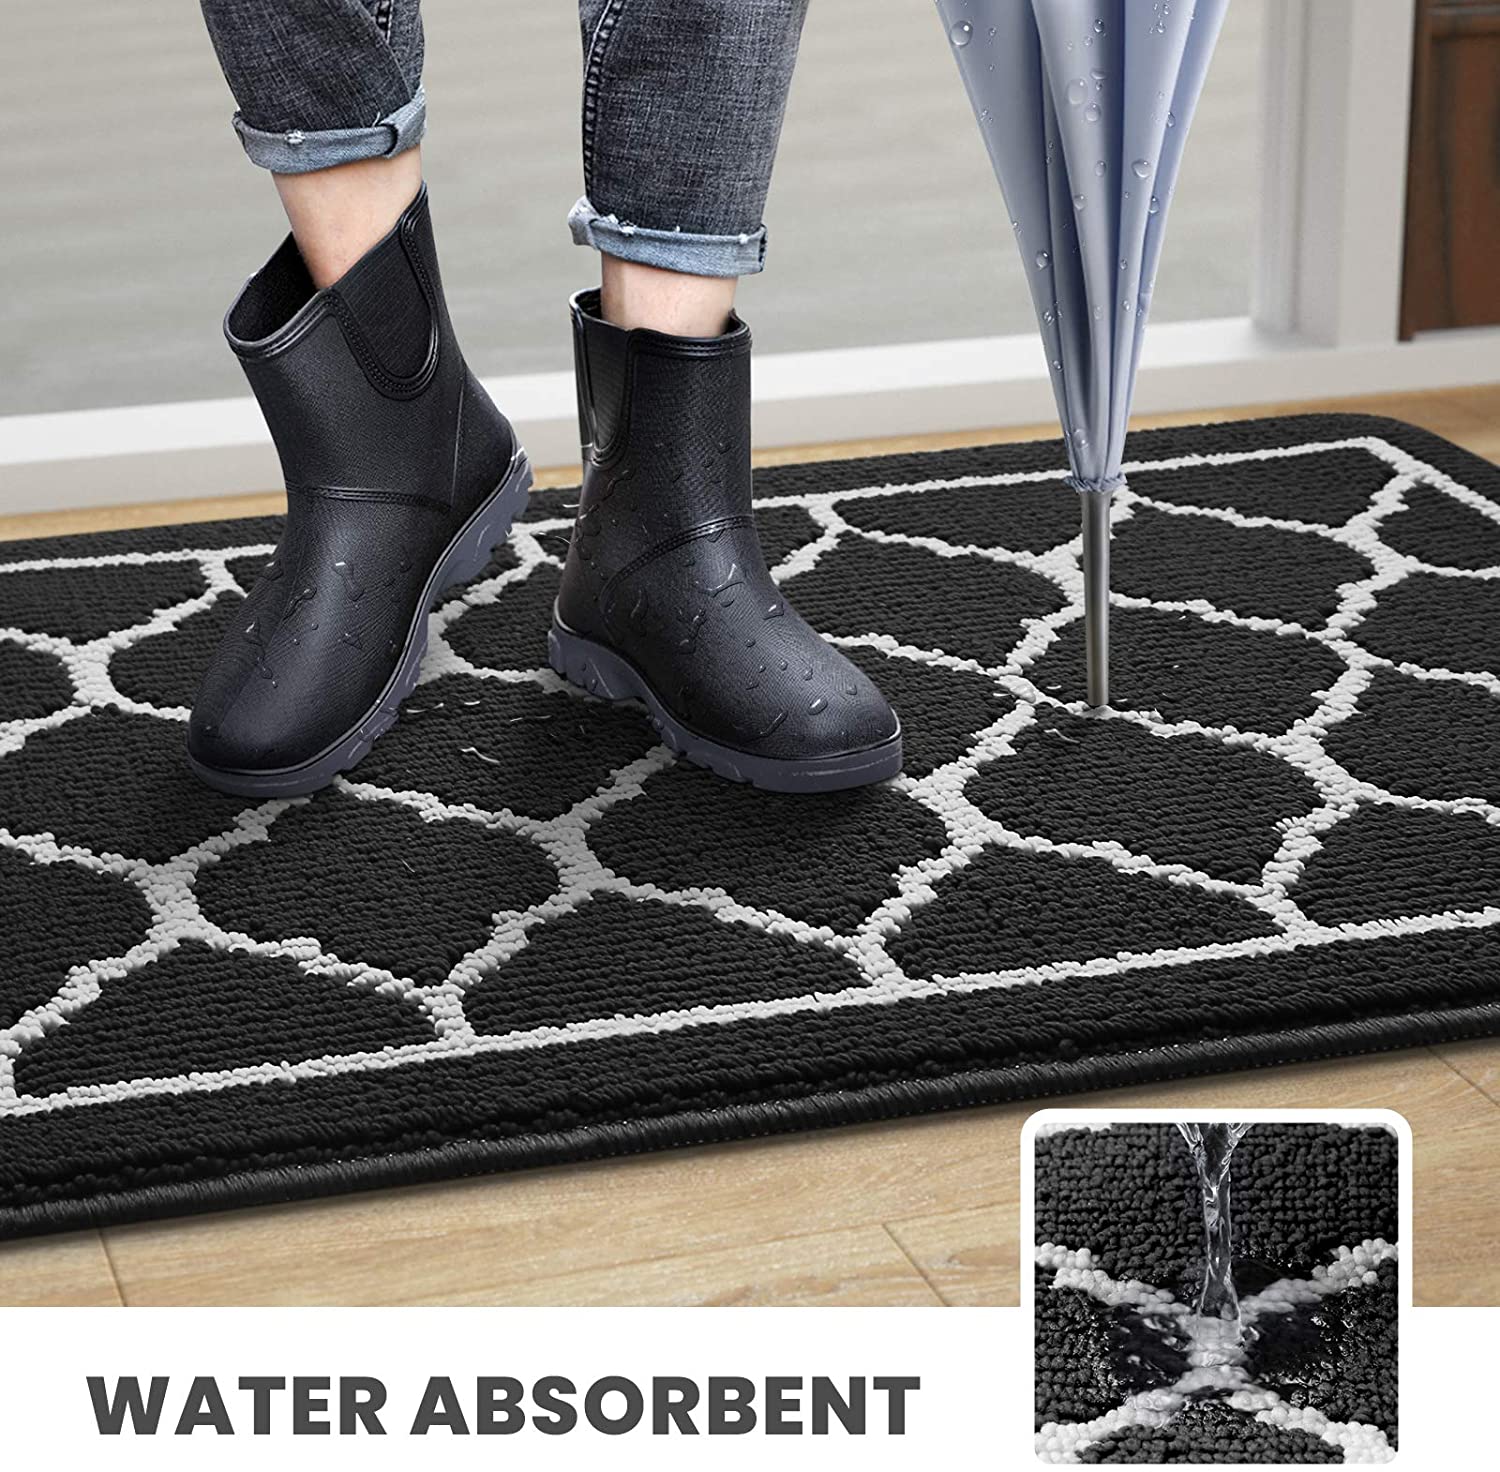 Entrance Mat Indoor and Outdoor Front Door Mat Entry Rug for Home